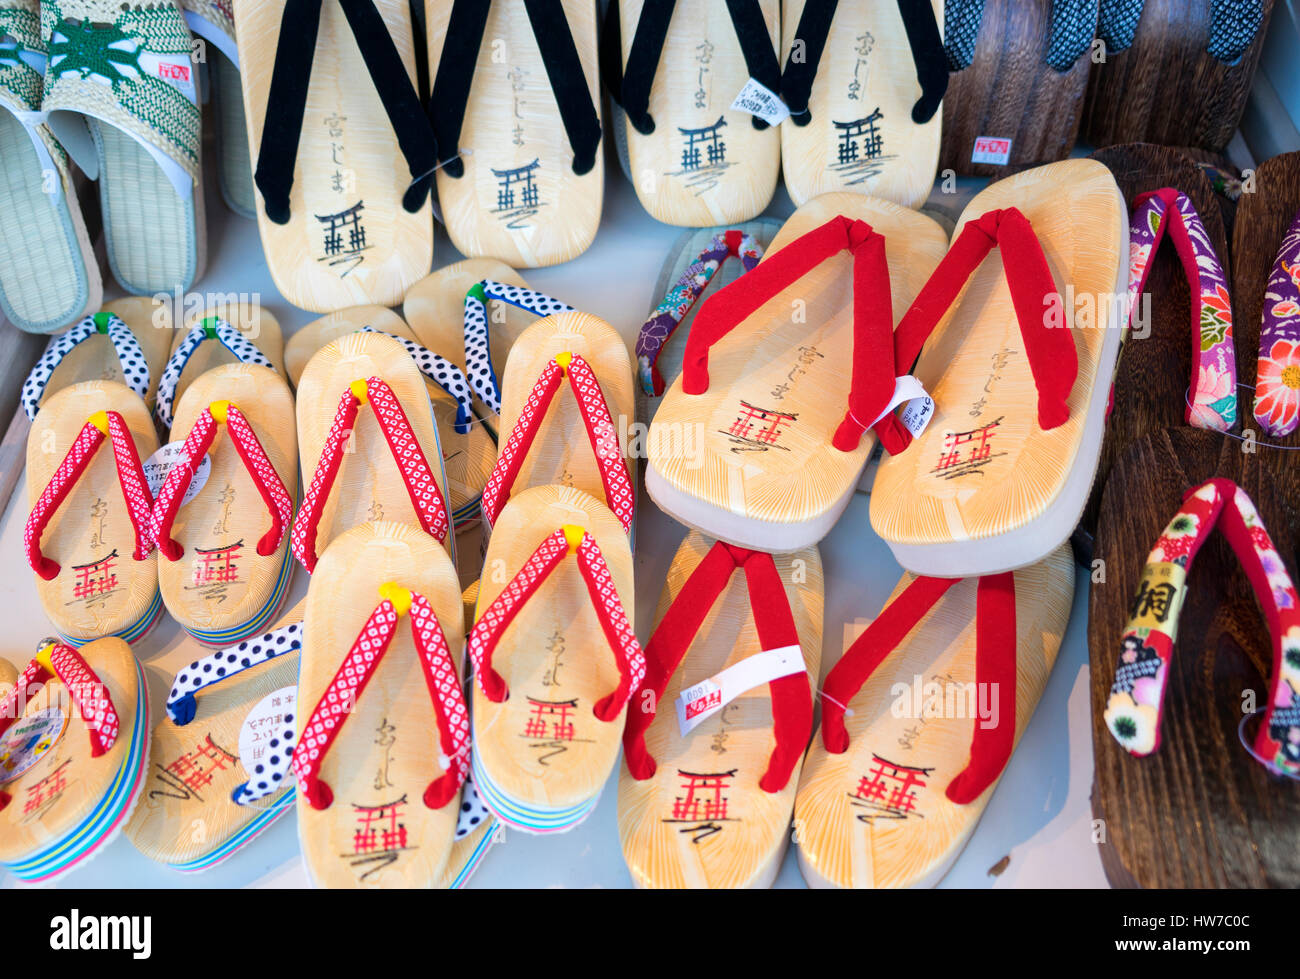 japan geta shoes for sale Stock Photo